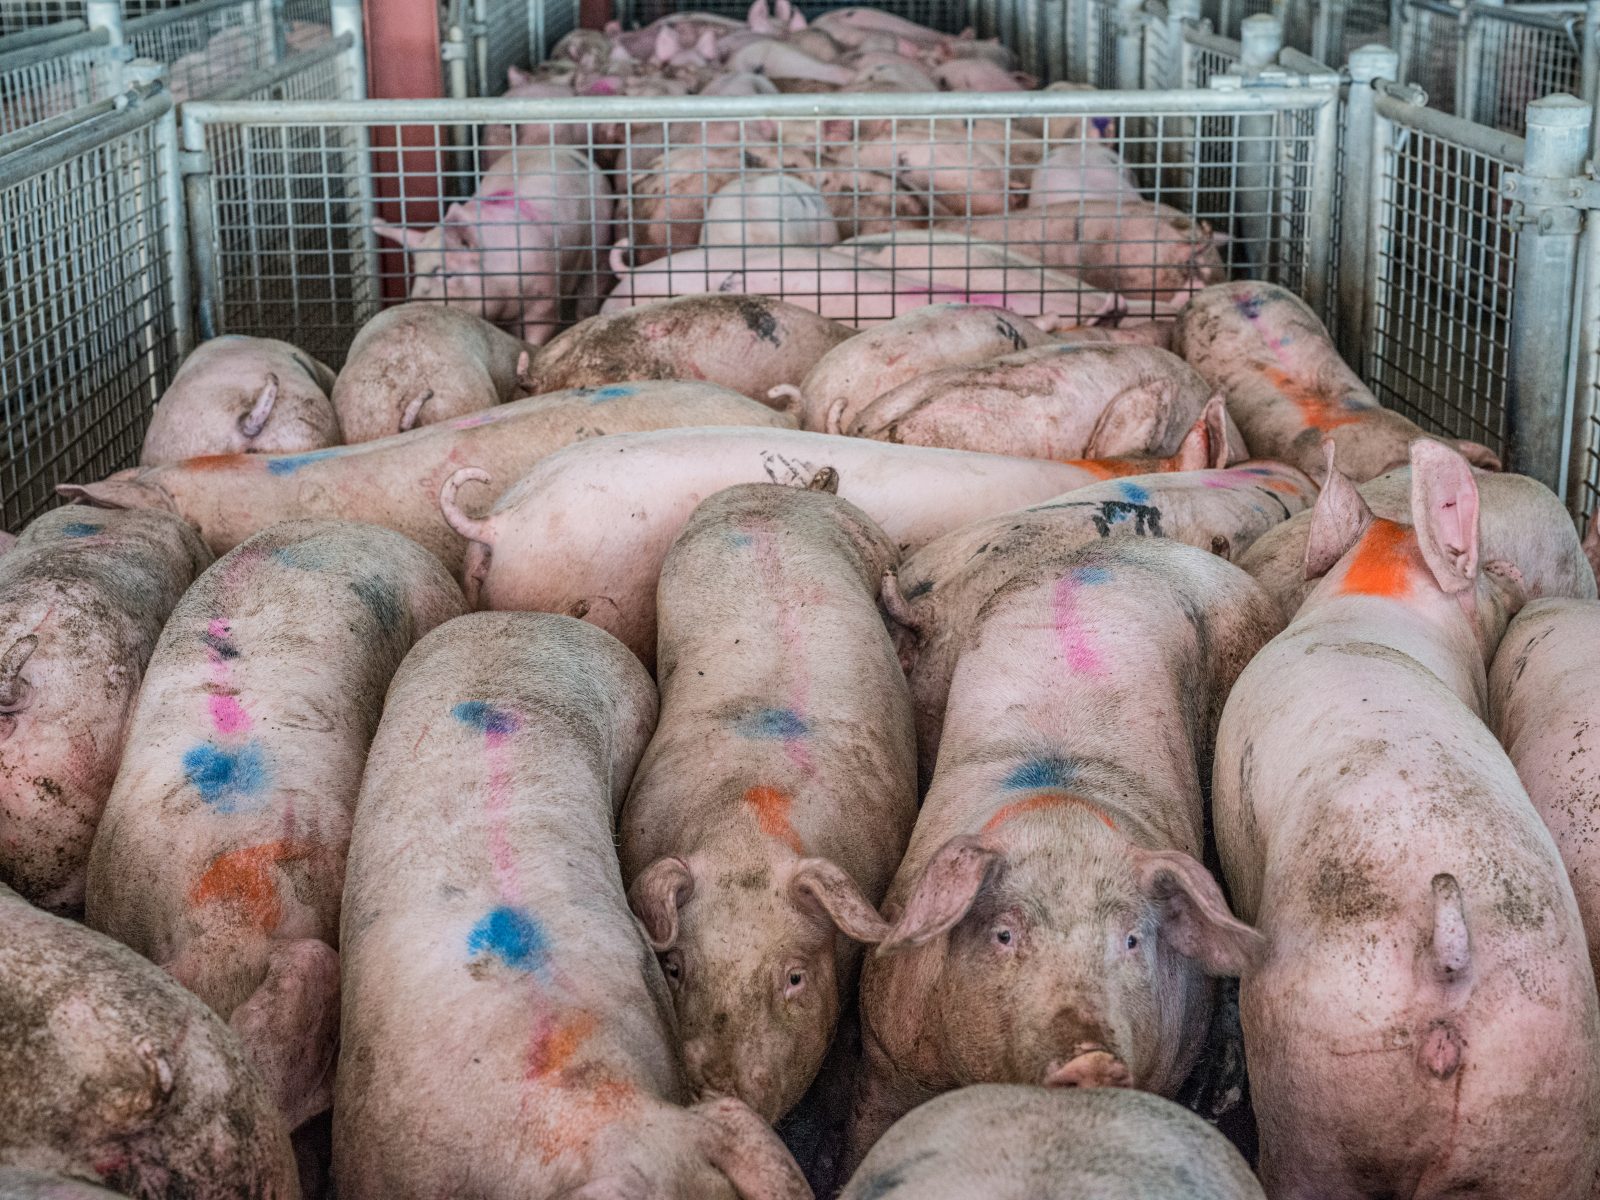 Pigs crammed into pens at a sale yard. Australia, 2017